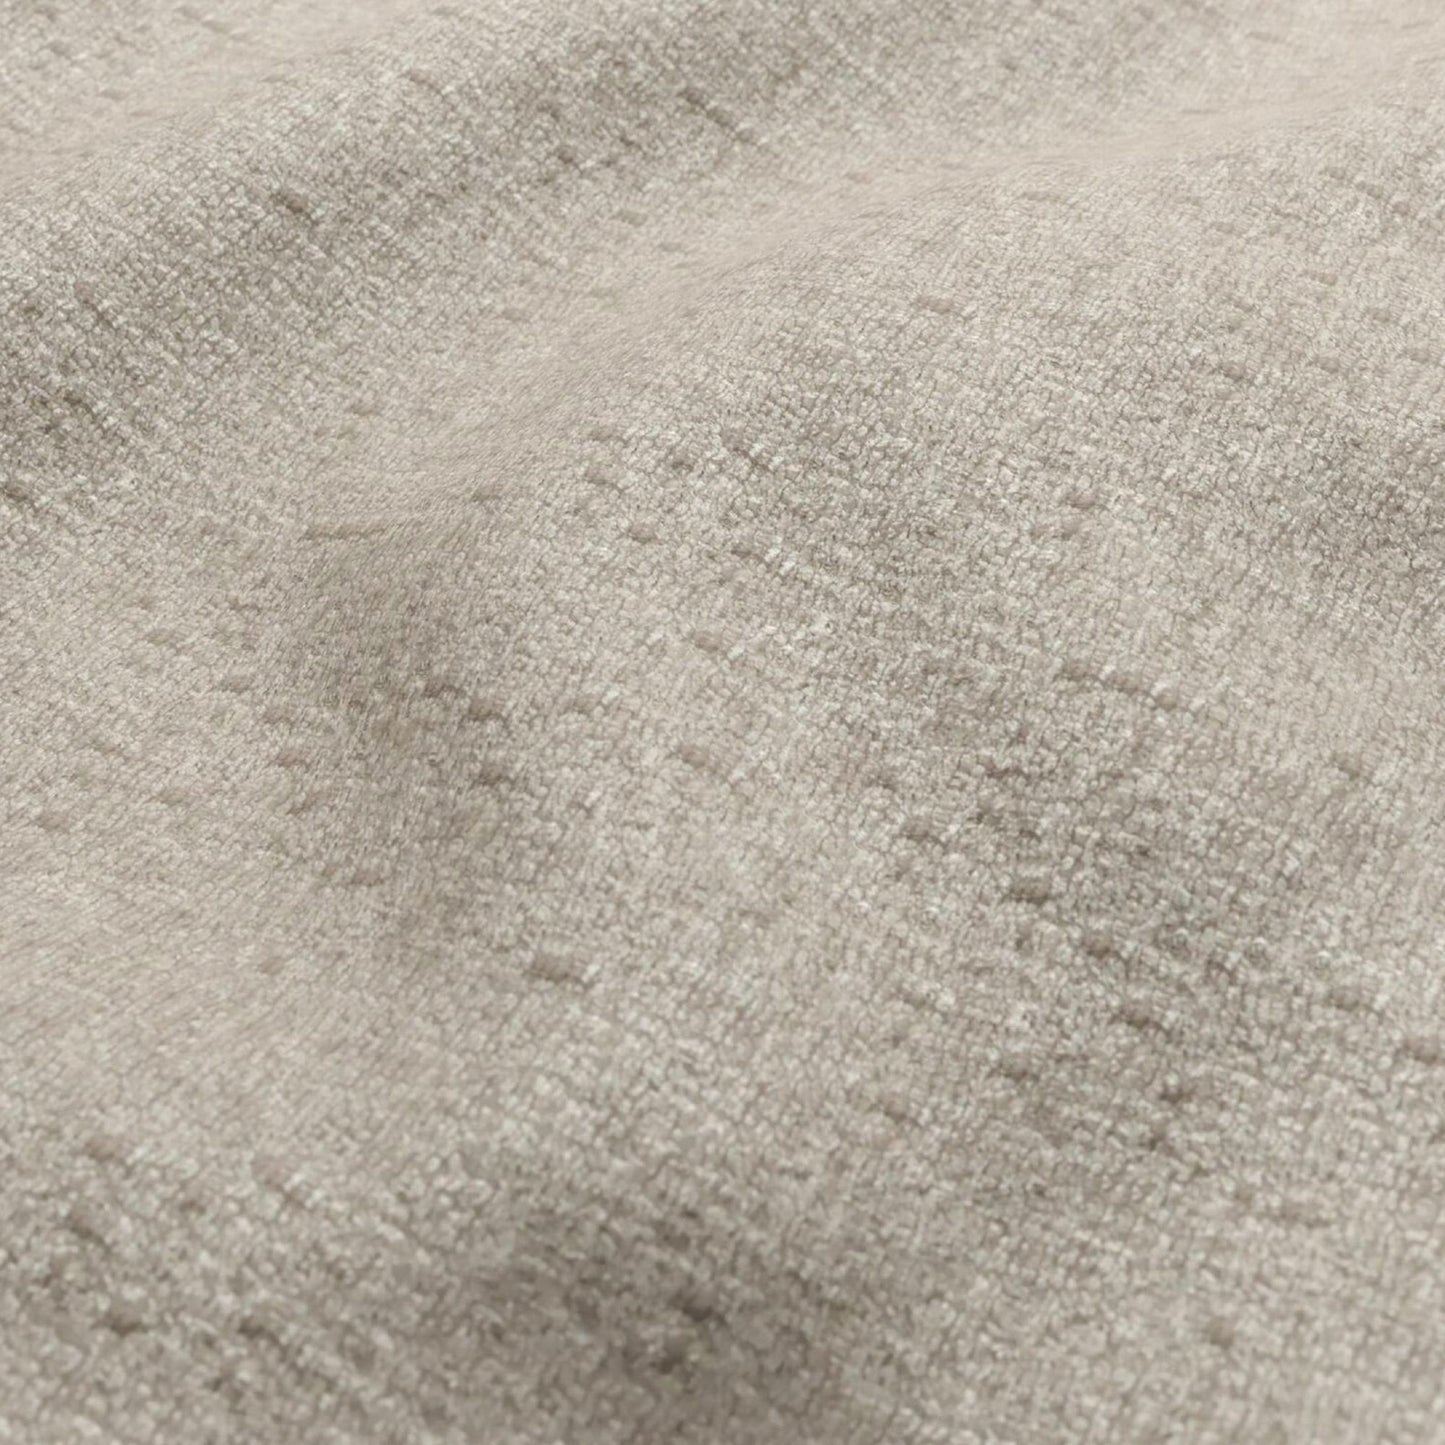 MONSIEUR SMOKE LUXURY CHENILLE FABRIC SAMPLE | SPECIAL COLLECTION | # 2